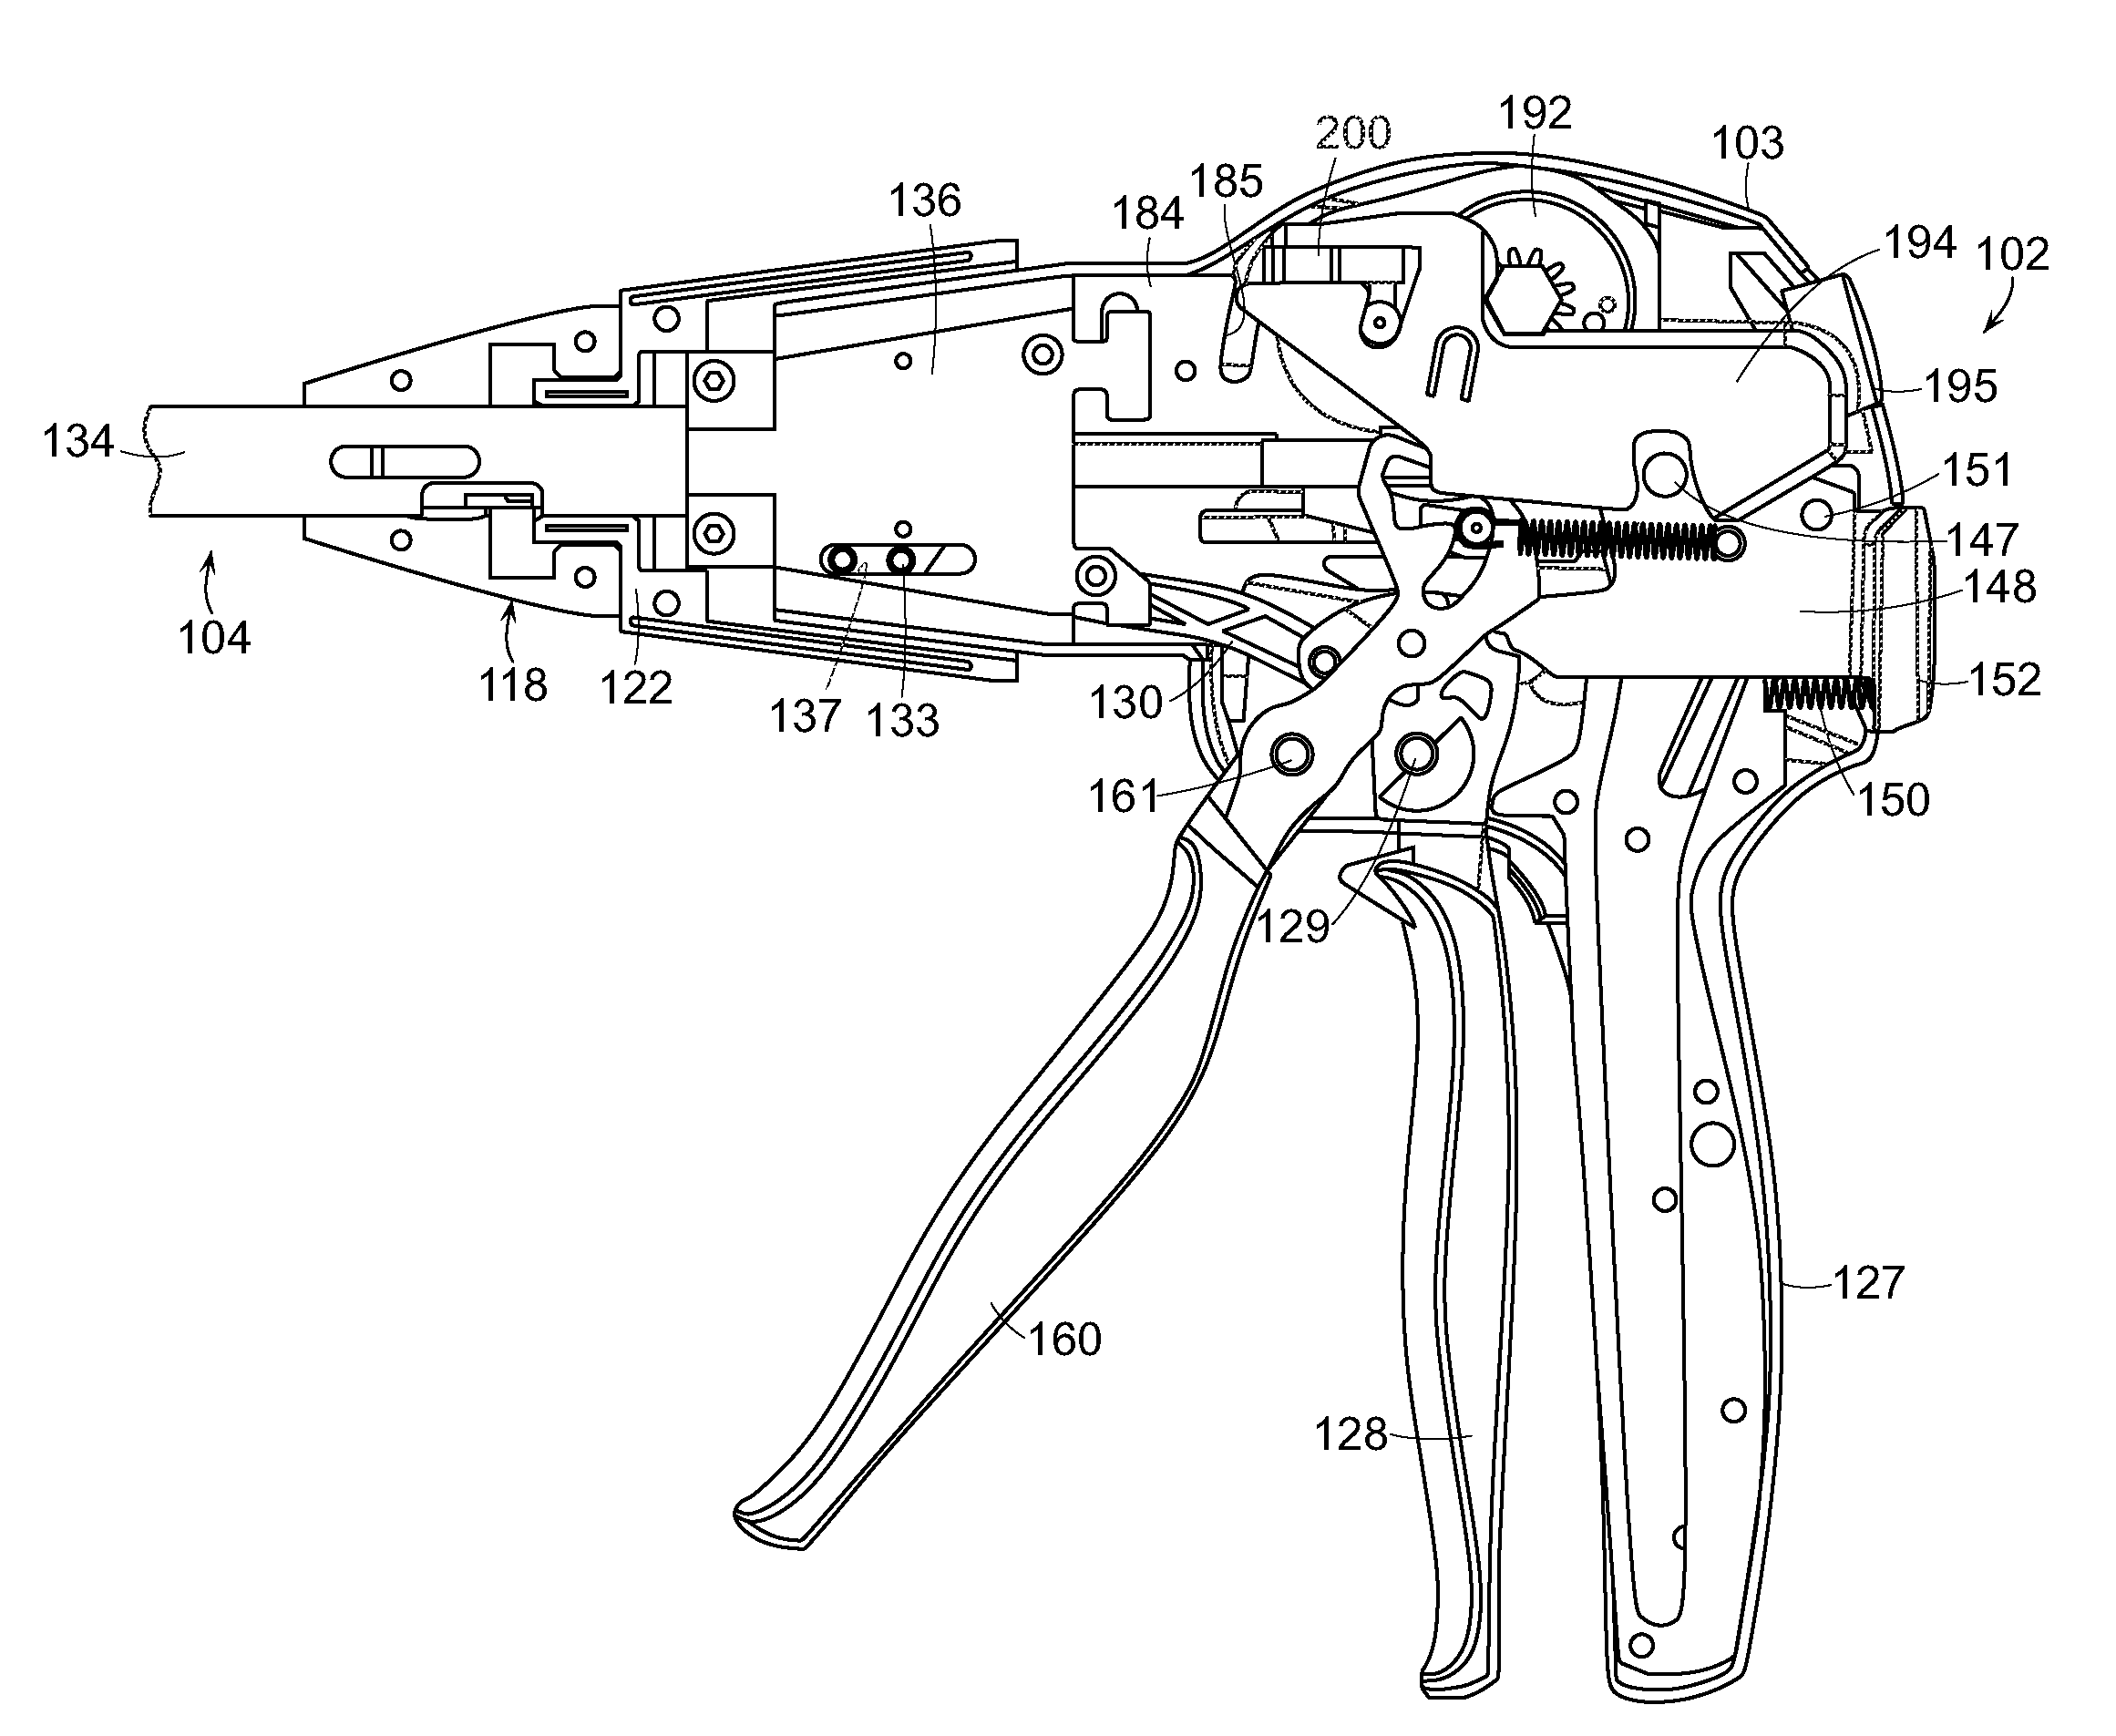 Surgical stapling instrument with a geared return mechanism